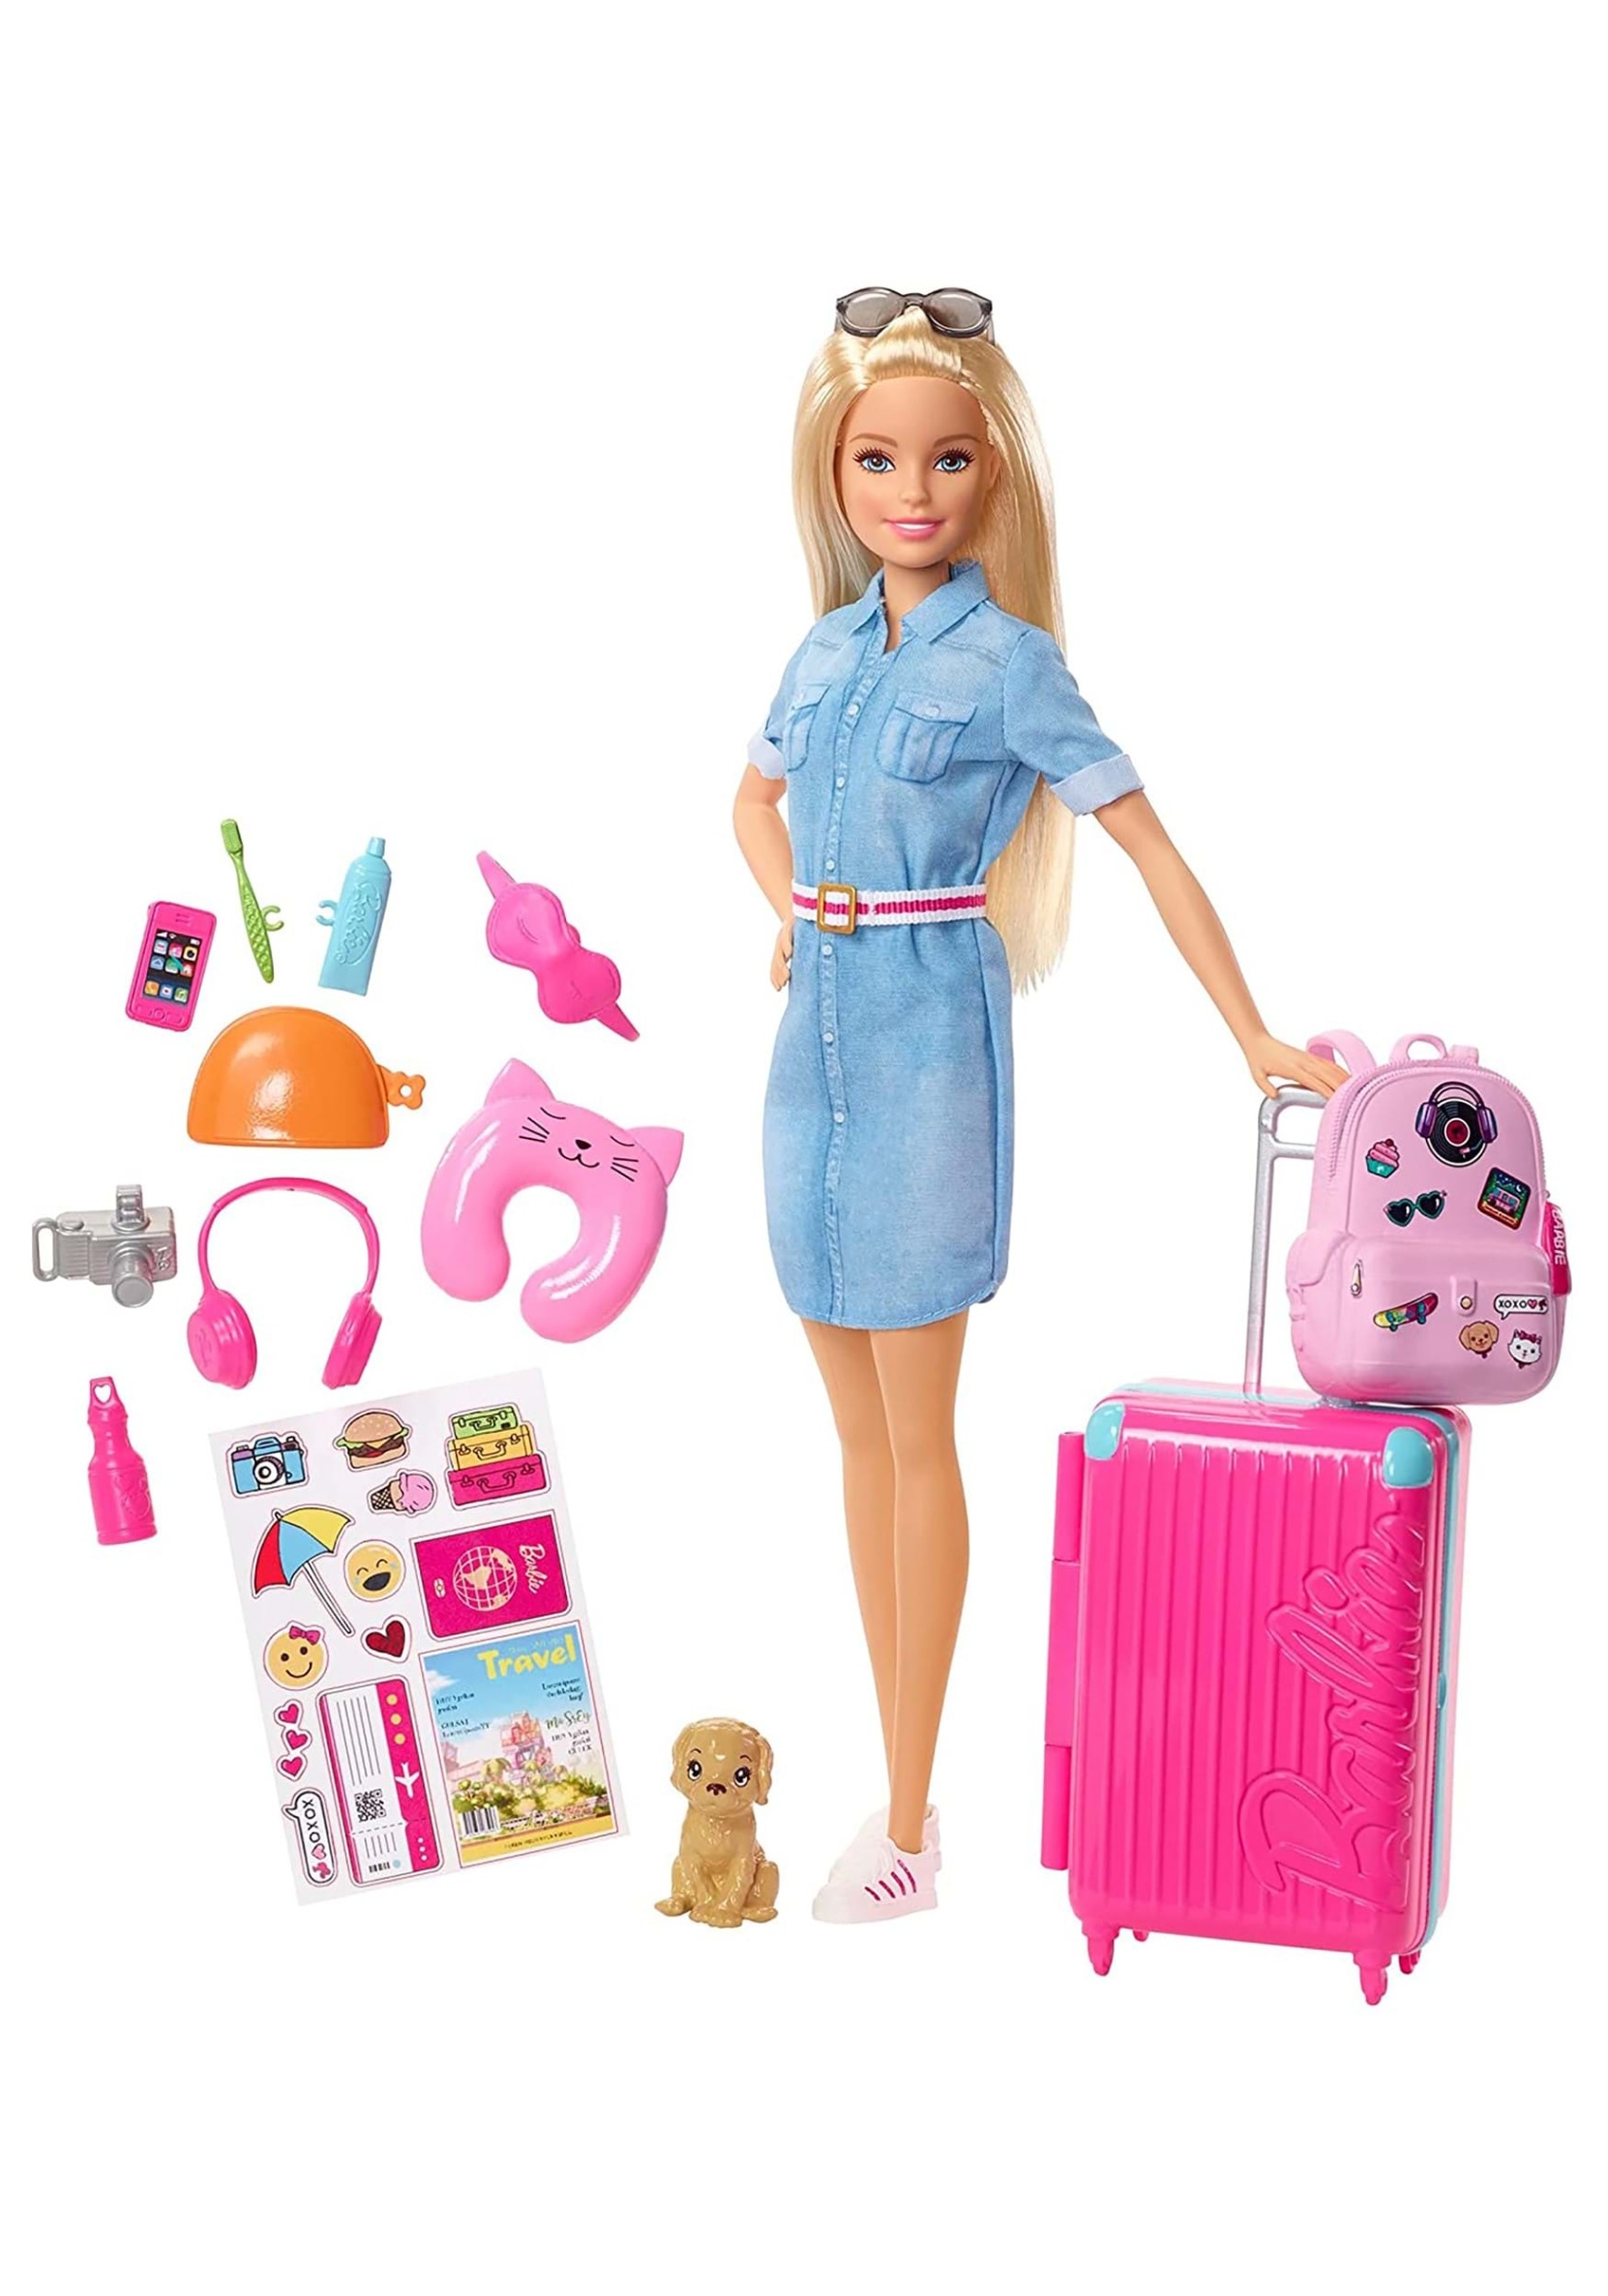 Upgrade Your Barbie Dreamhouse With The Coolest Accessories!